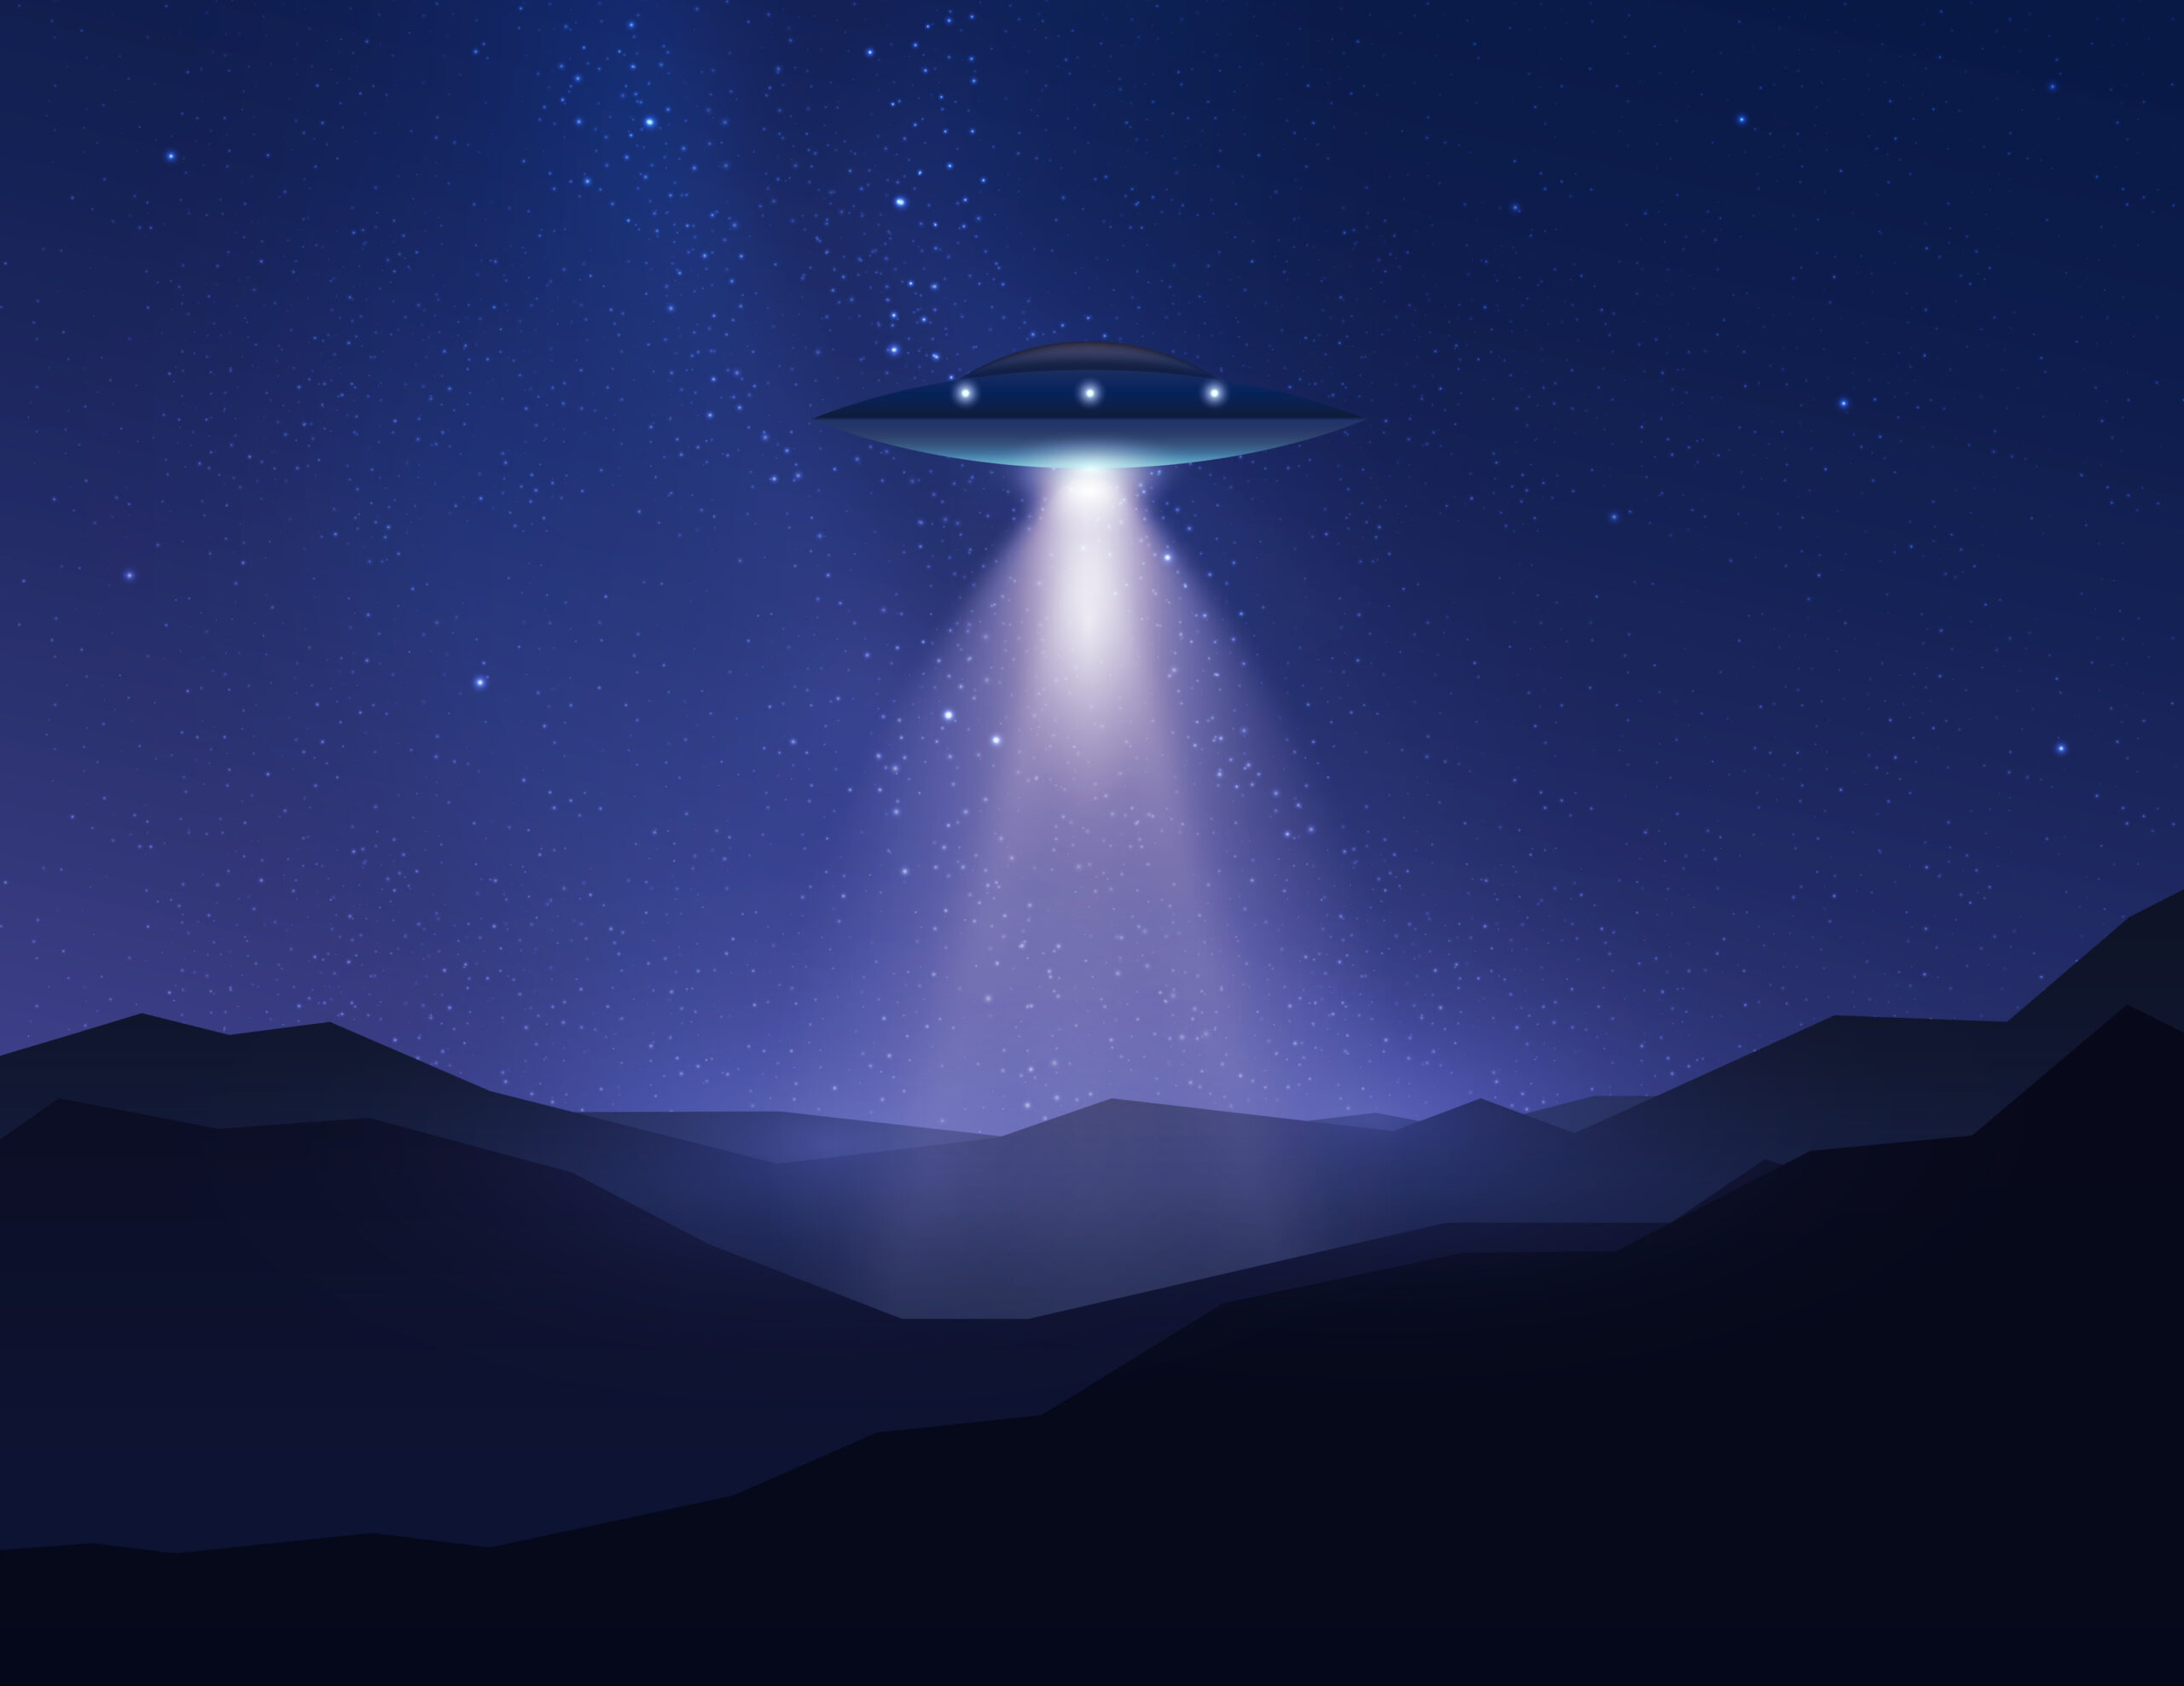 Featured image for “What is World UFO Day?”